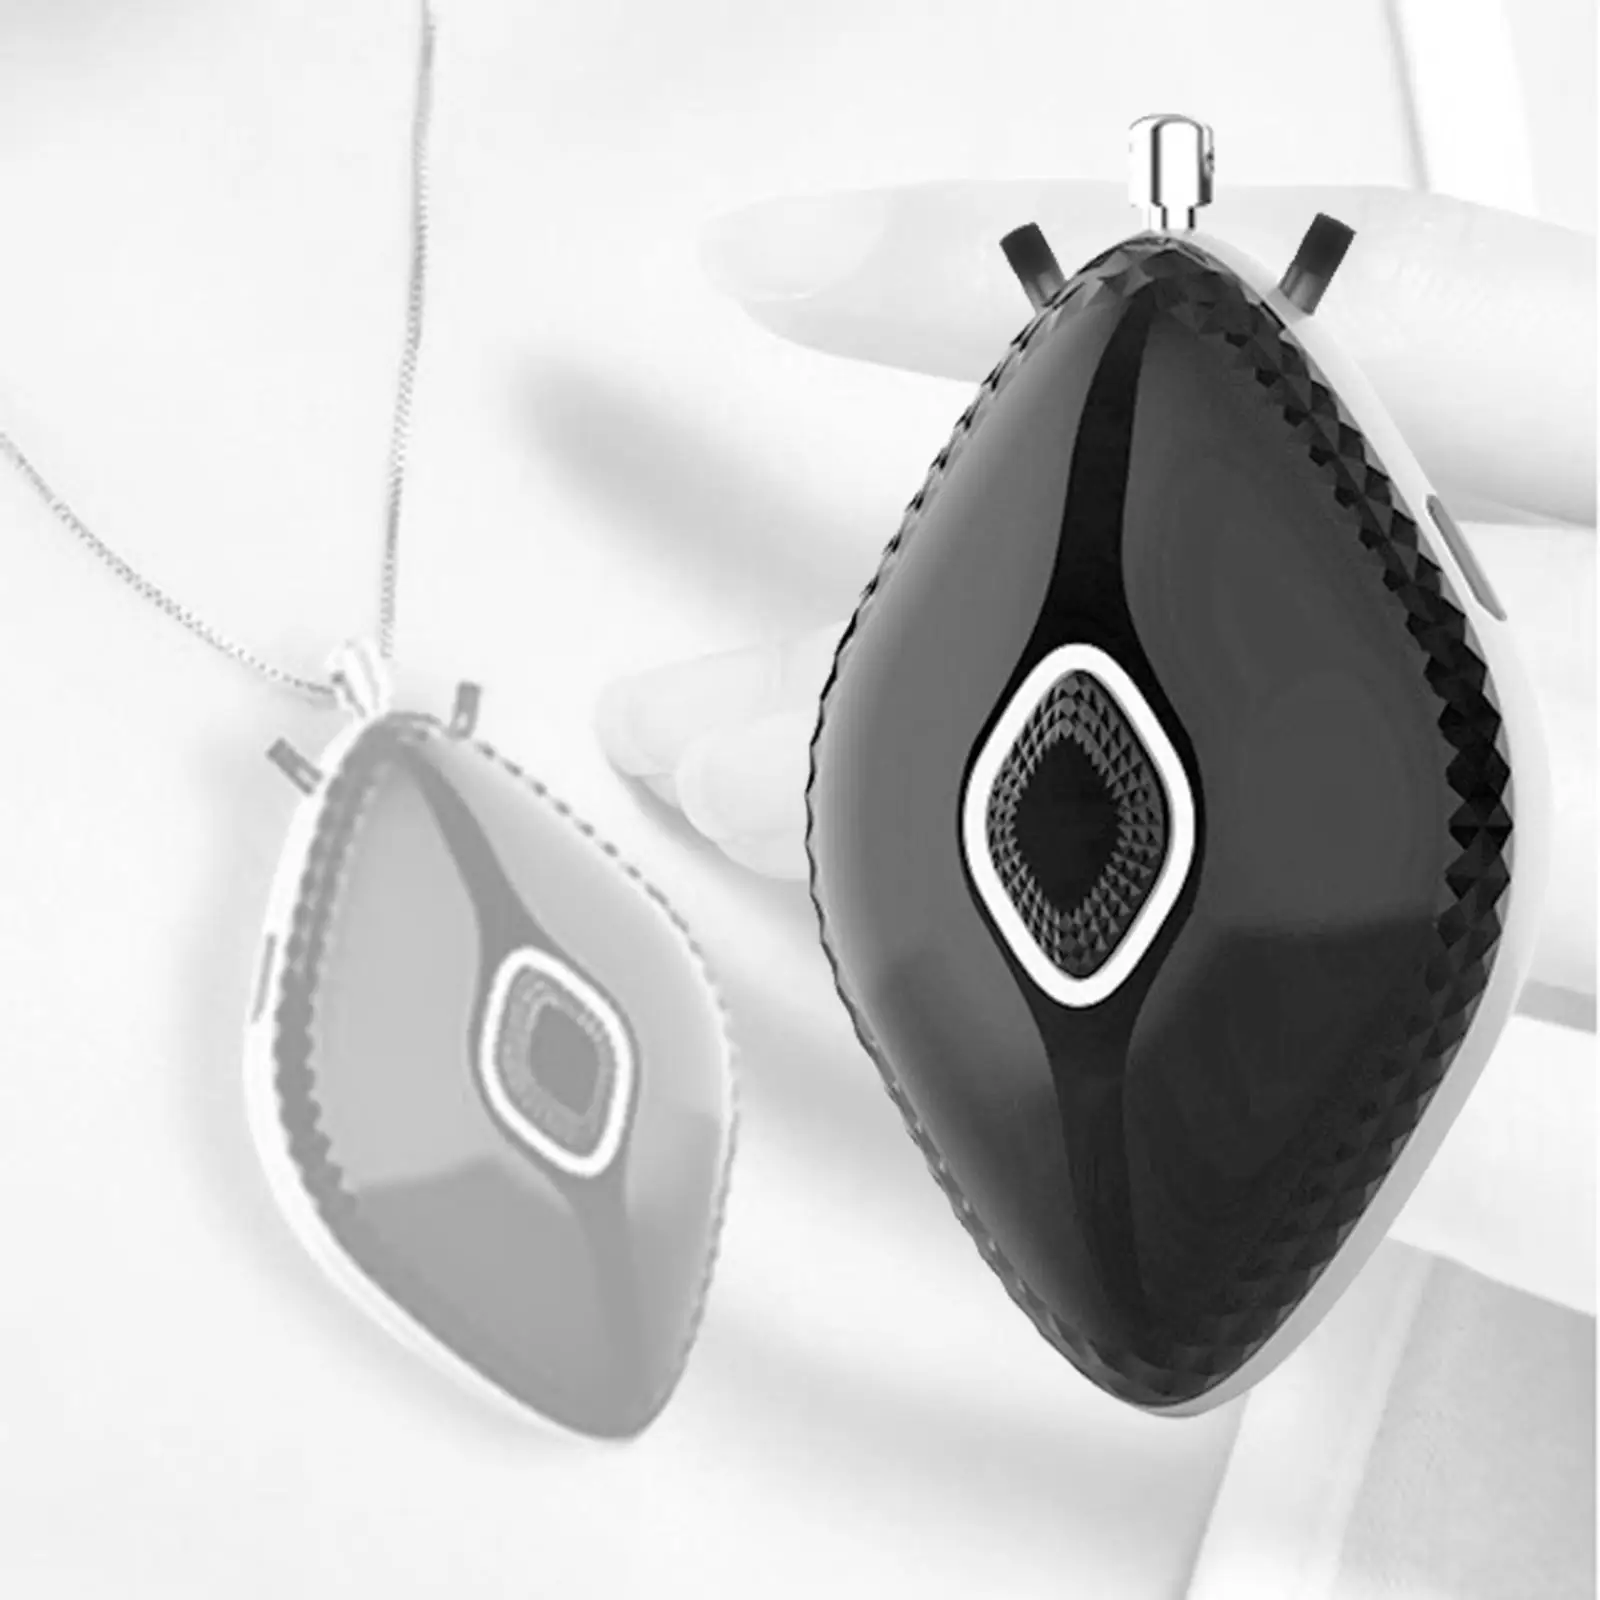 Wearable Air Purifier Portable Electronic Air Necklace for Travel School Tourism Kids Adults